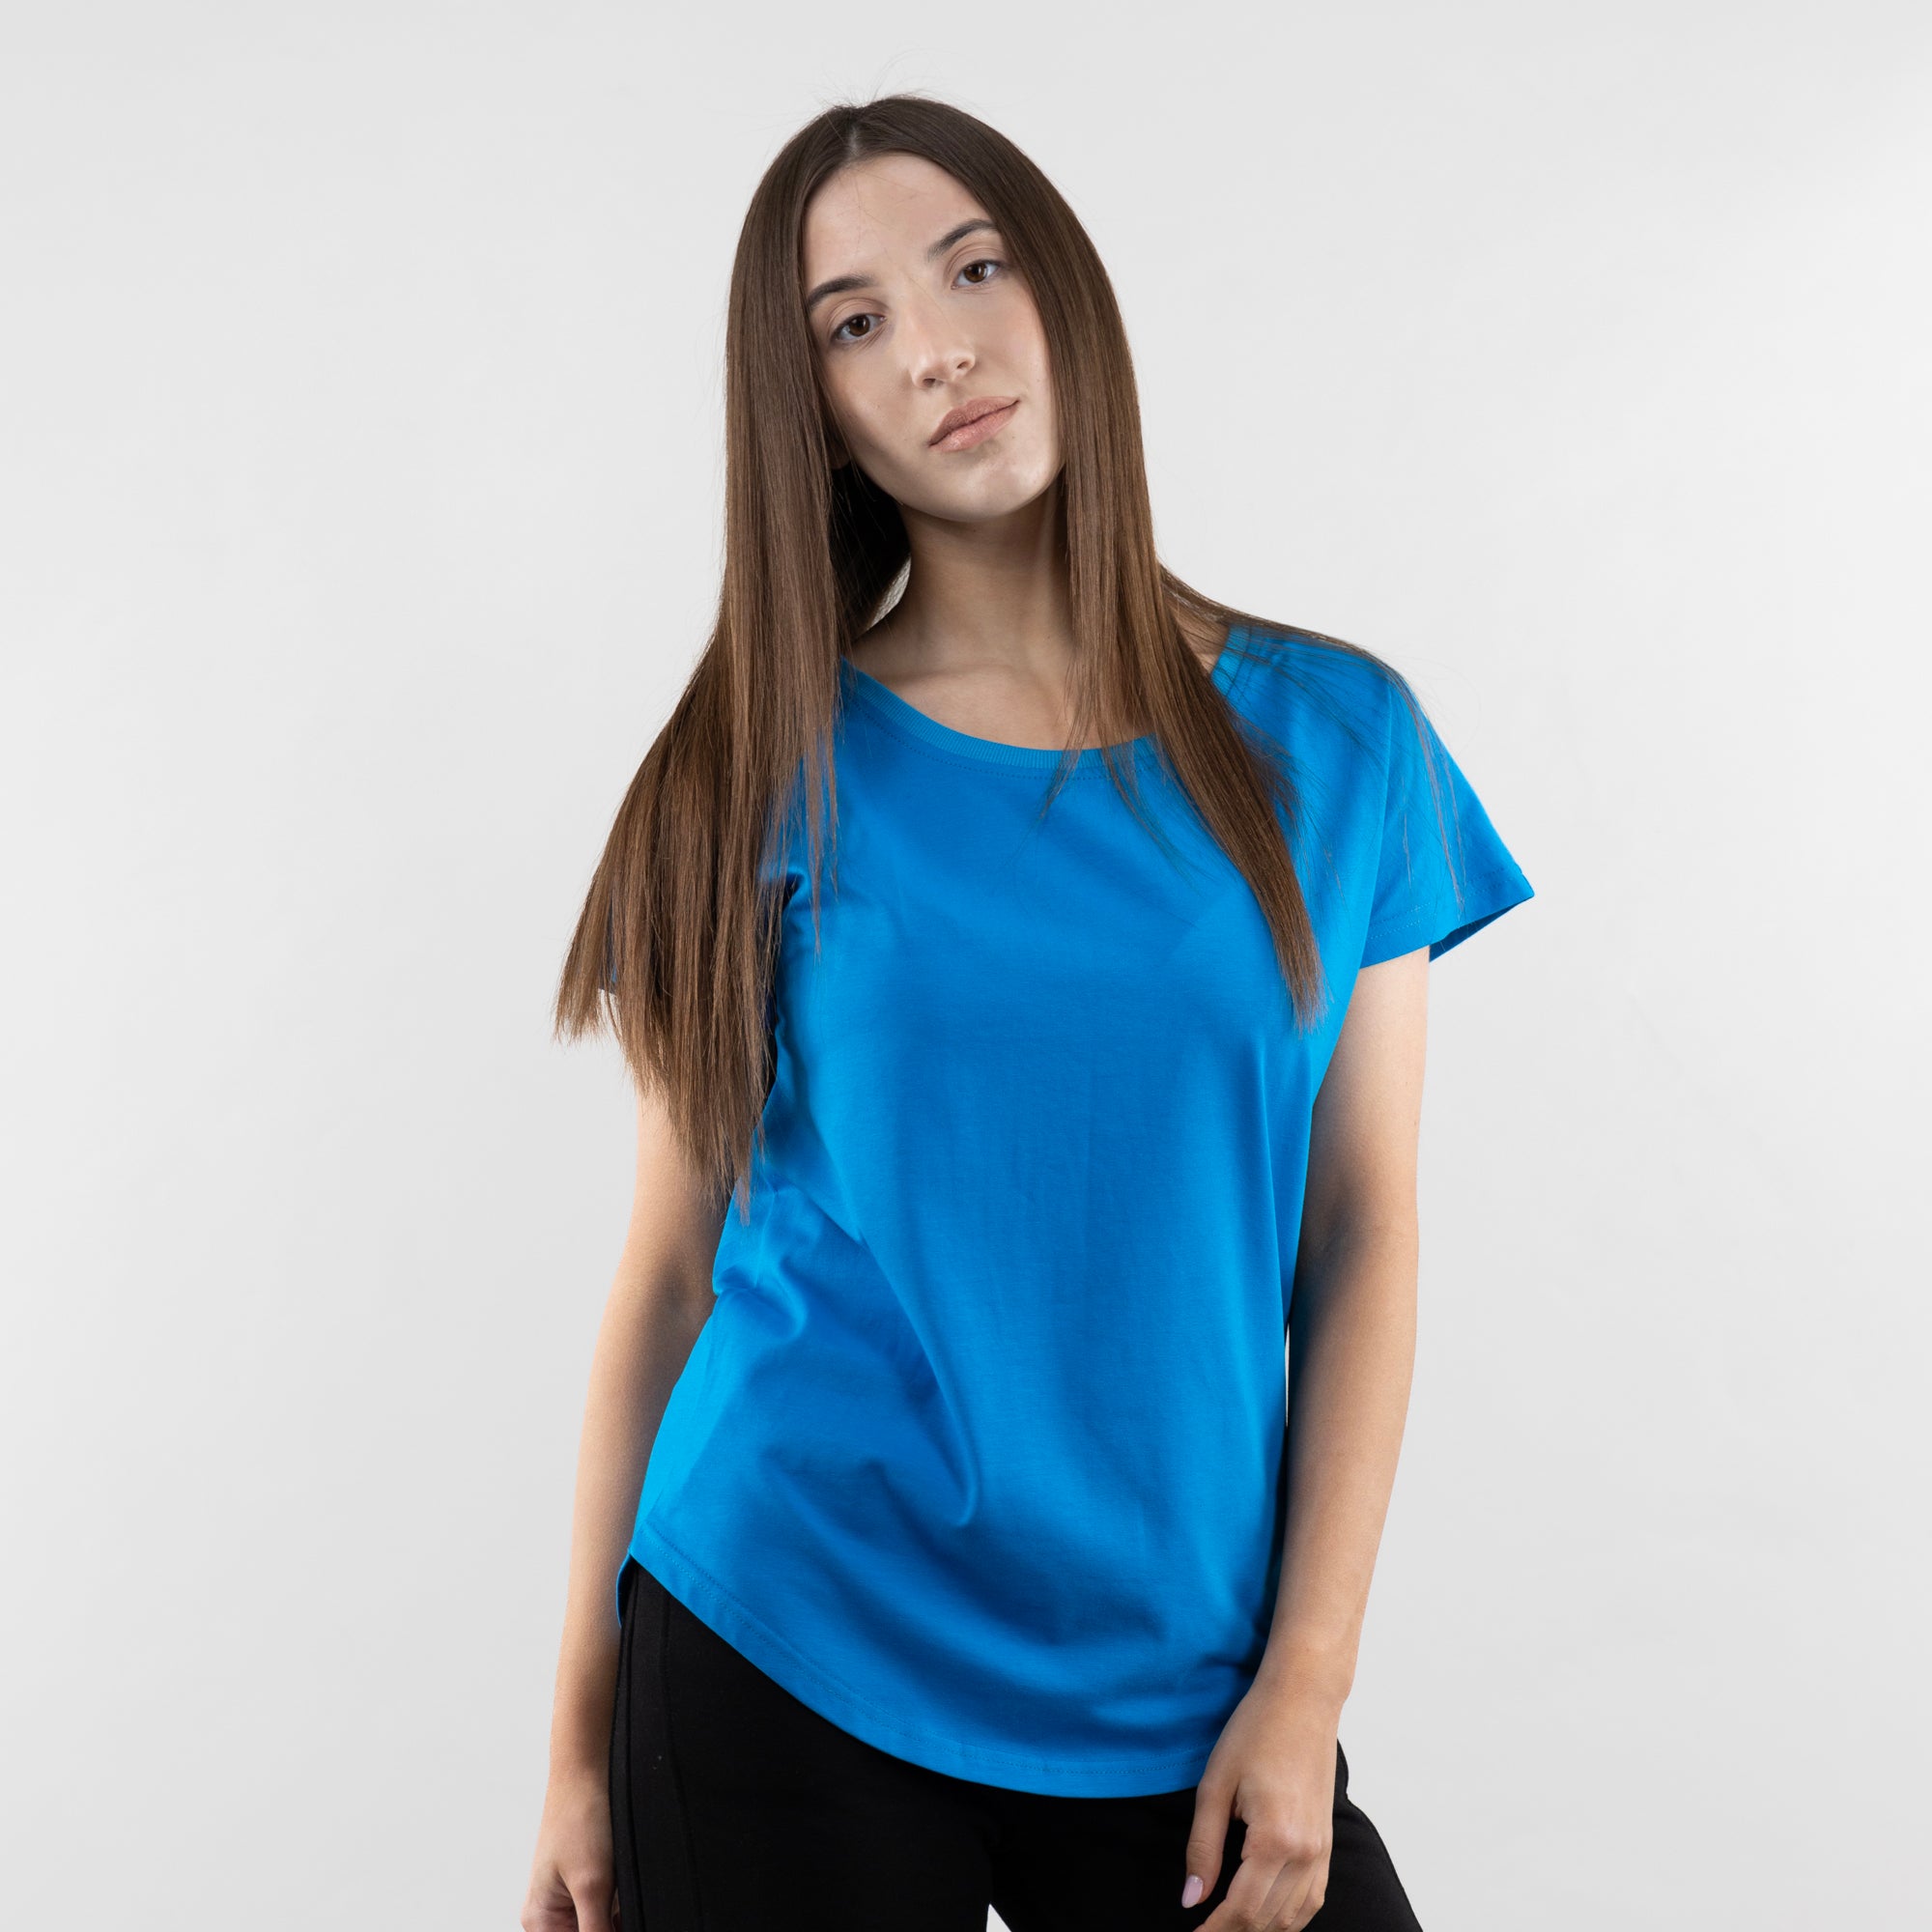 Women's T-shirt With a Curly Bottom, Casual T-shirt